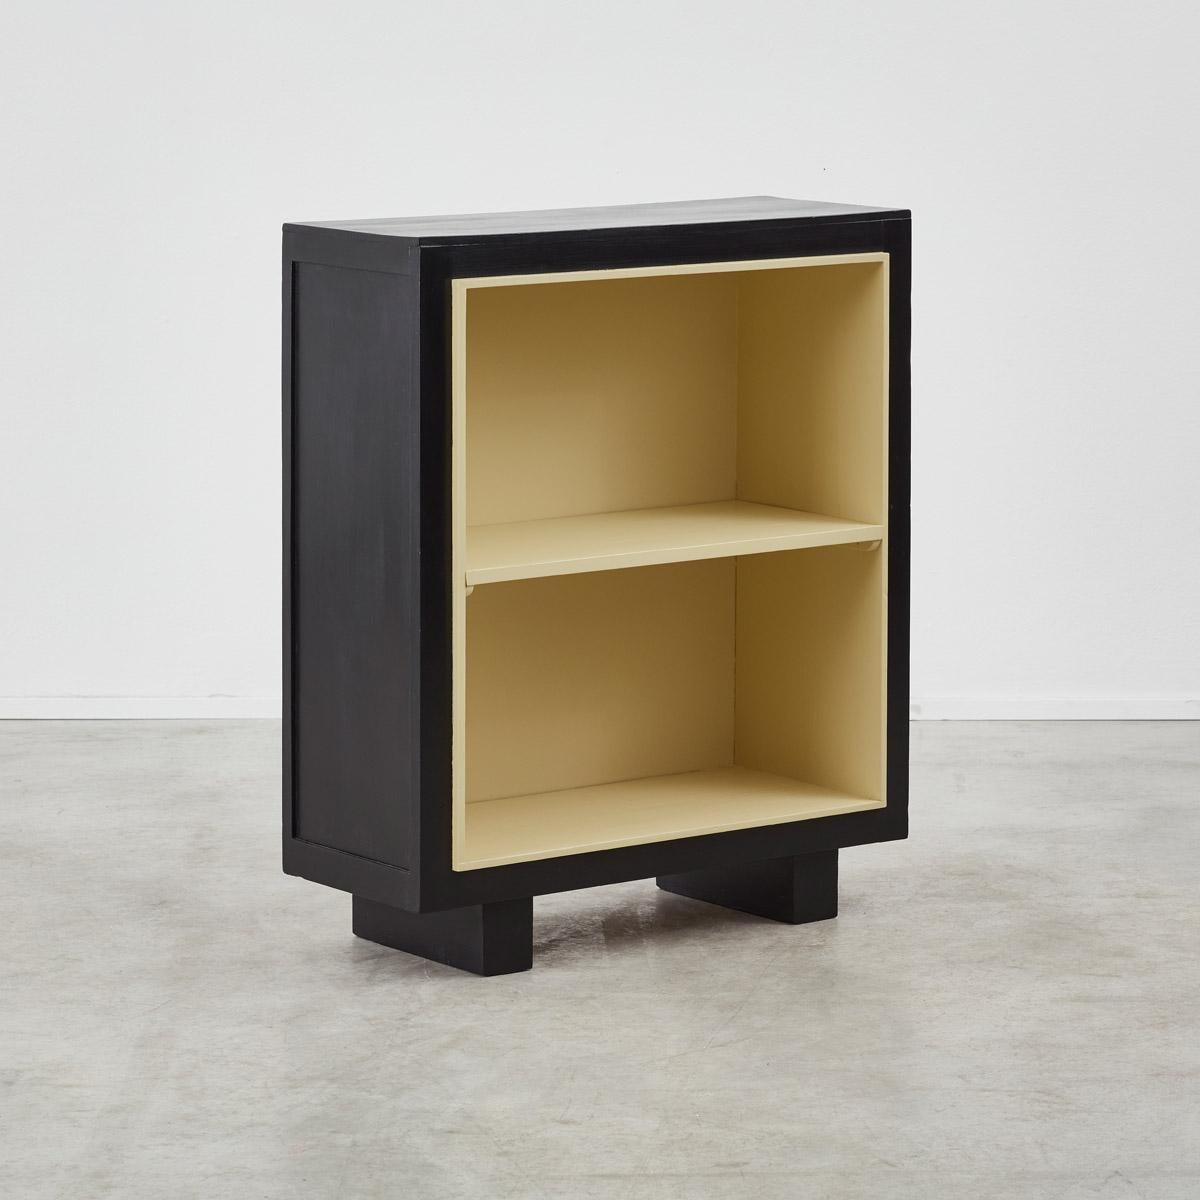 Bold and striking, this open cabinet exudes the charm of the Art Deco movement. Designed by the highly regarded furniture manufacturer Maison Gouffé, known for their training and manufacturing Jean Royere. Featuring two compartments, the cabinet has